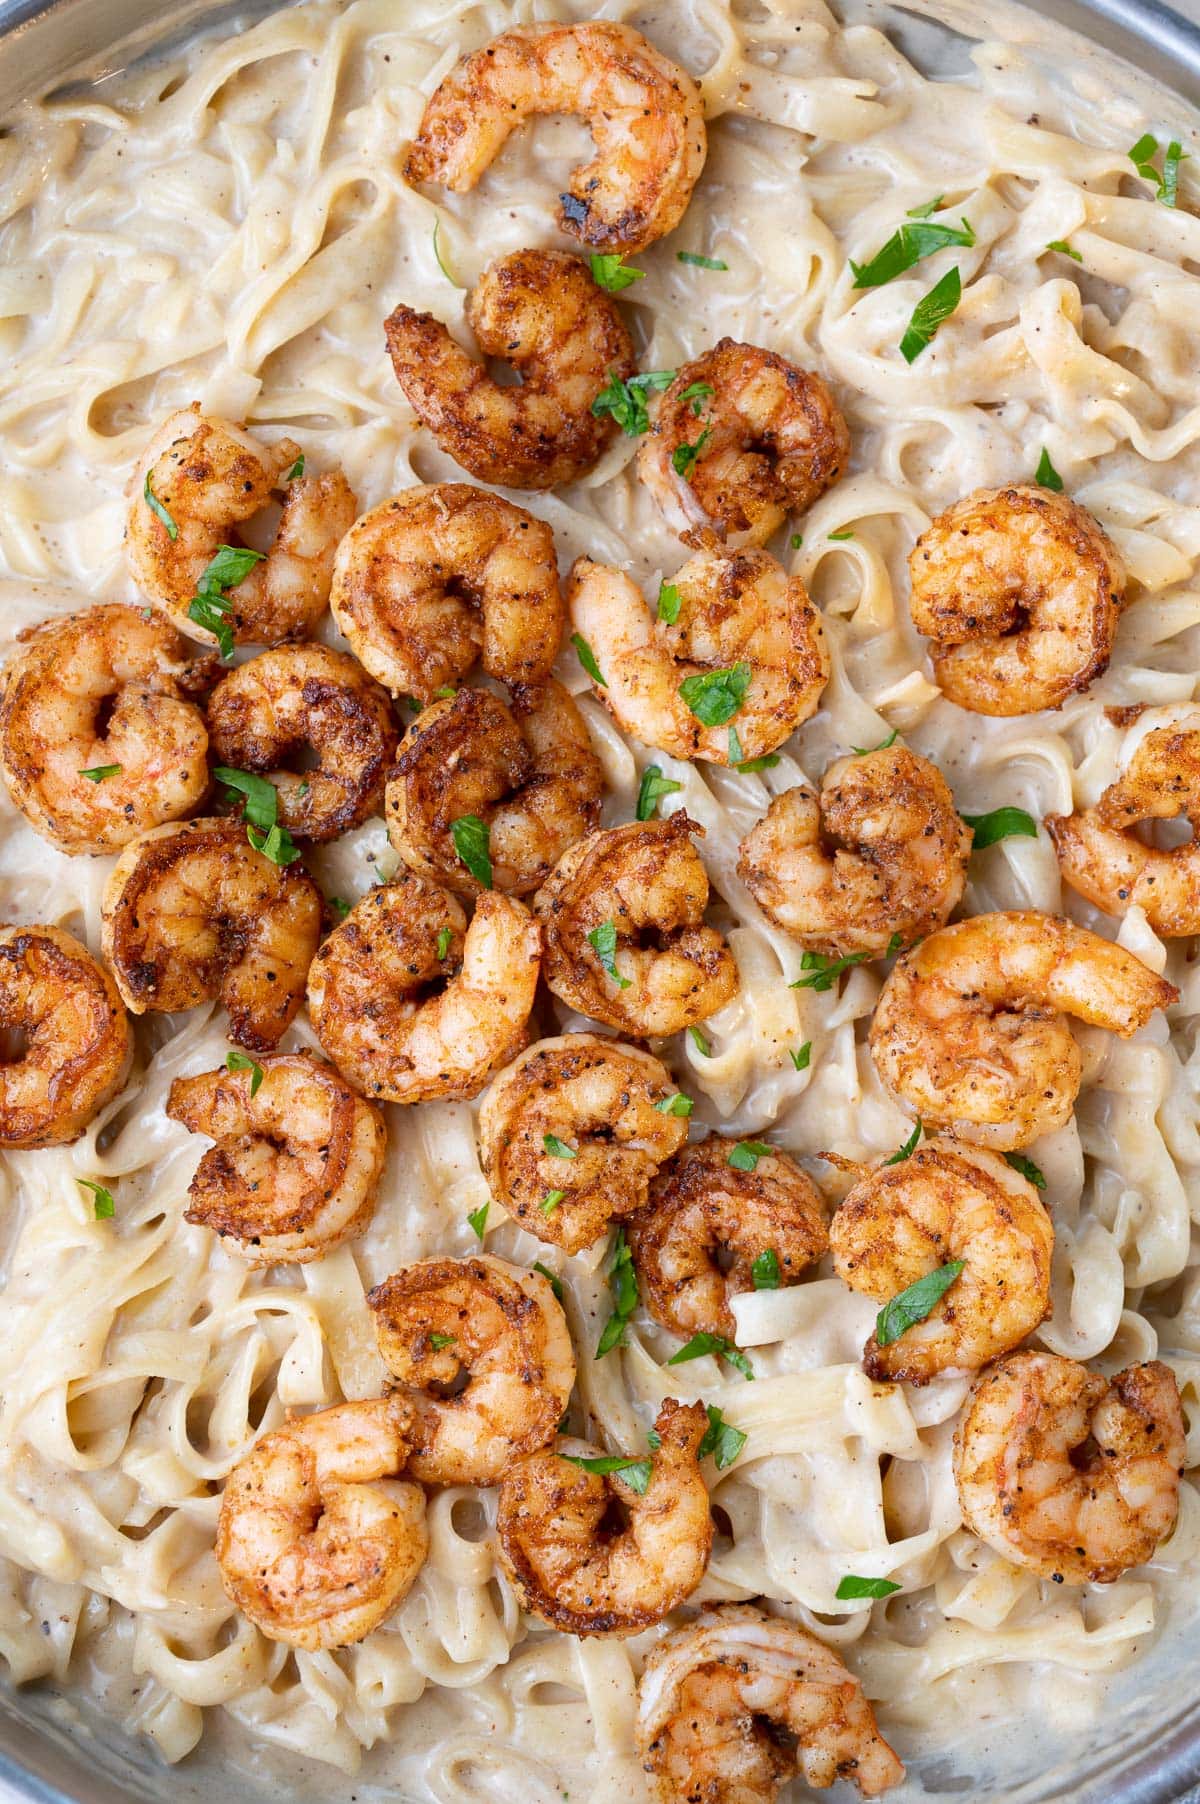 A close up picture of Cajun shrimp pasta in a frying pan.